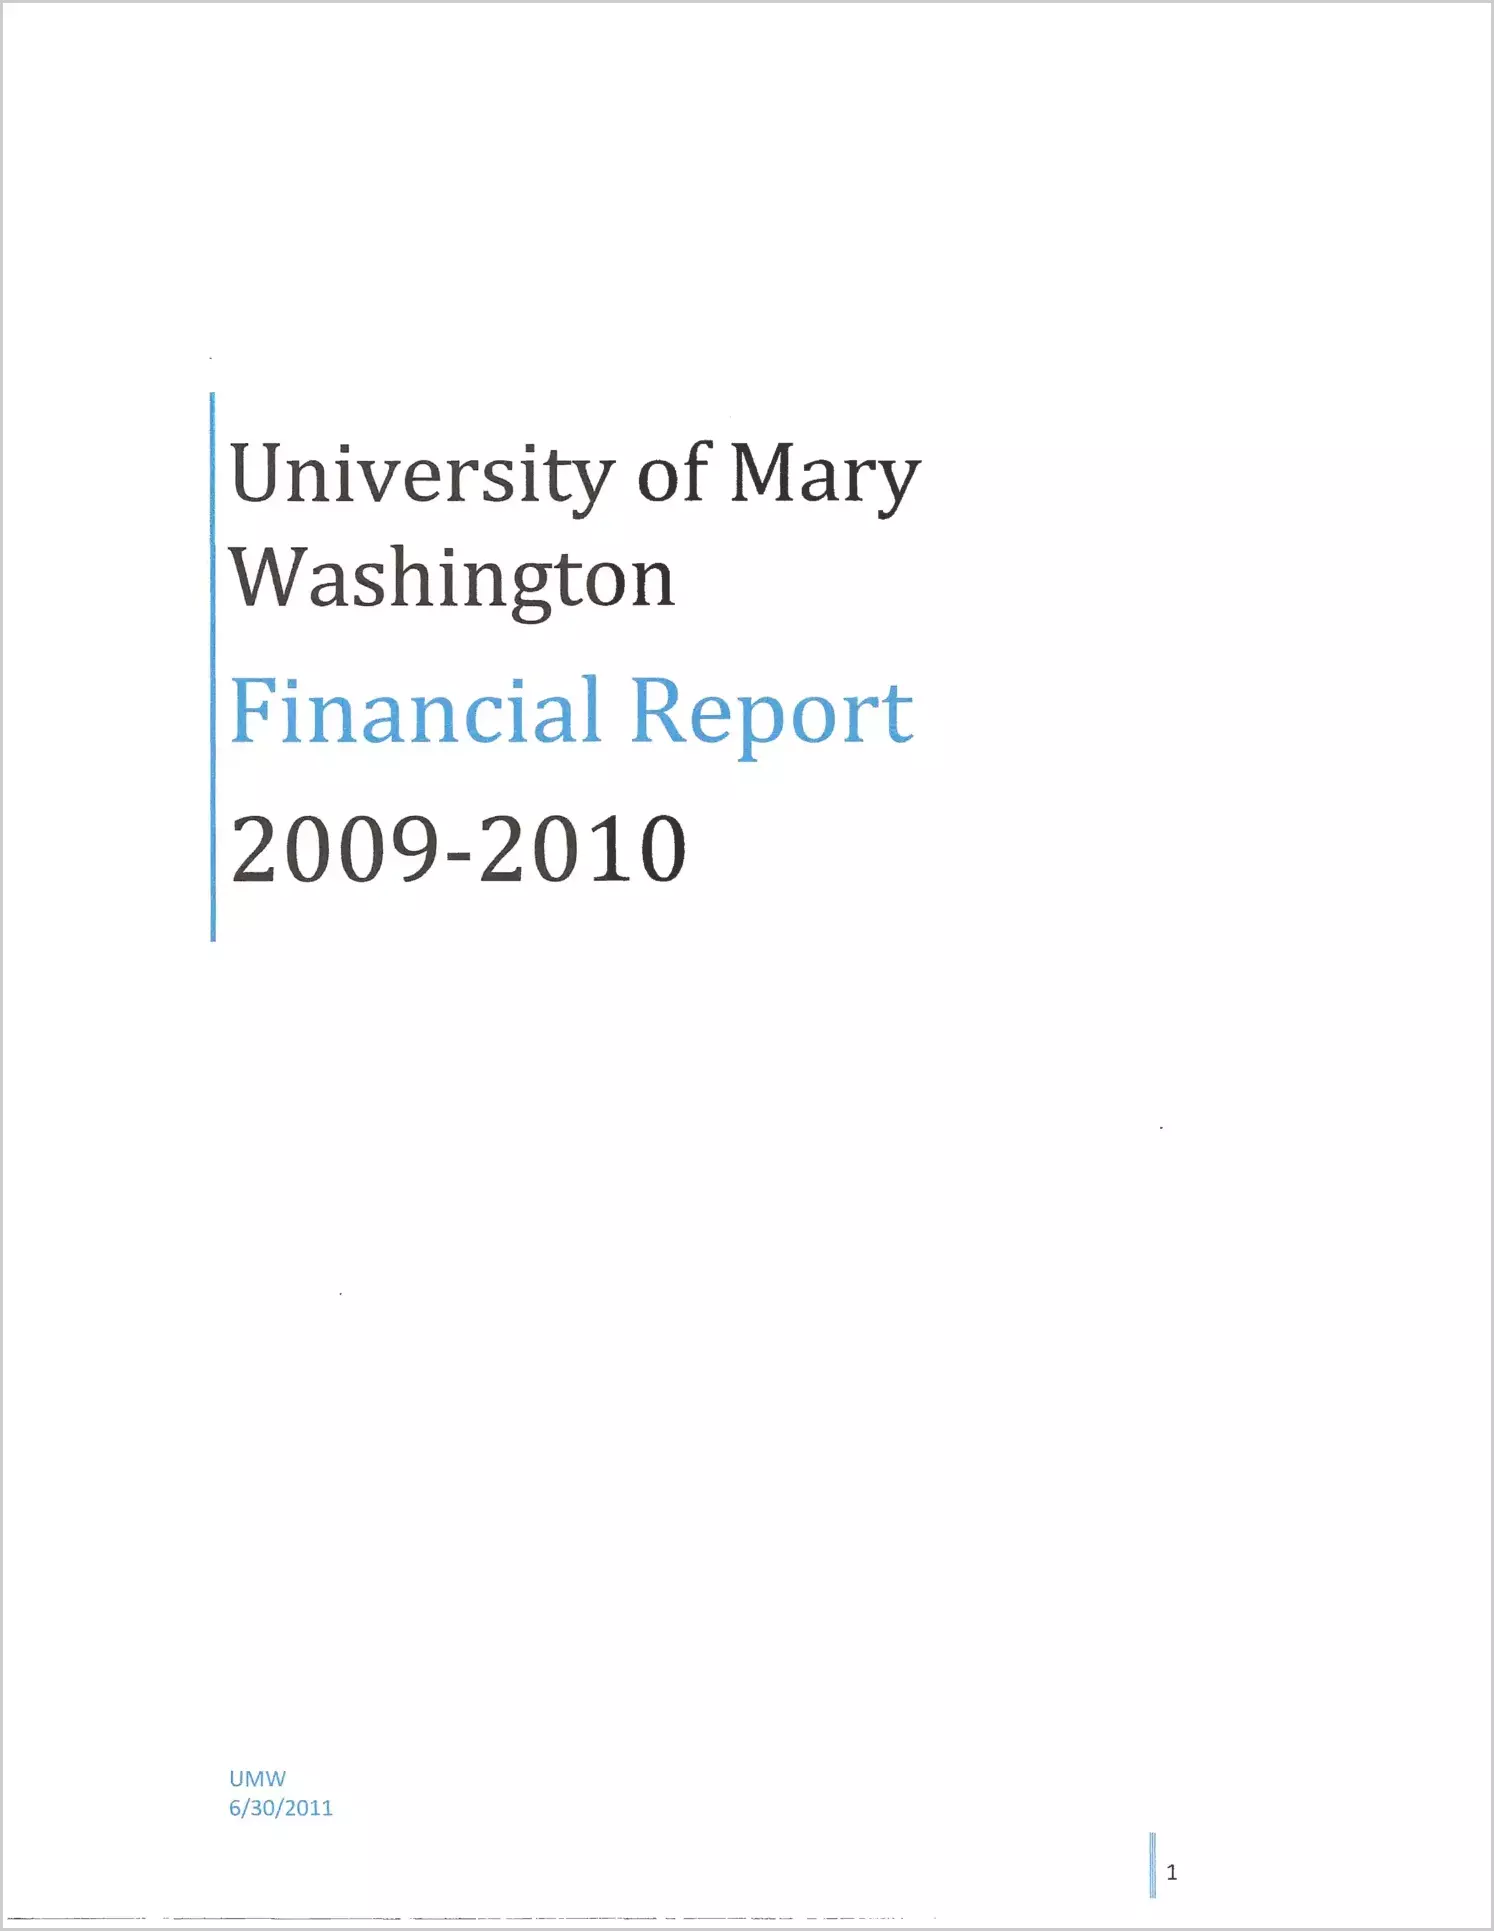 University of Mary Washington Financial Report for the year ended June 30, 2010